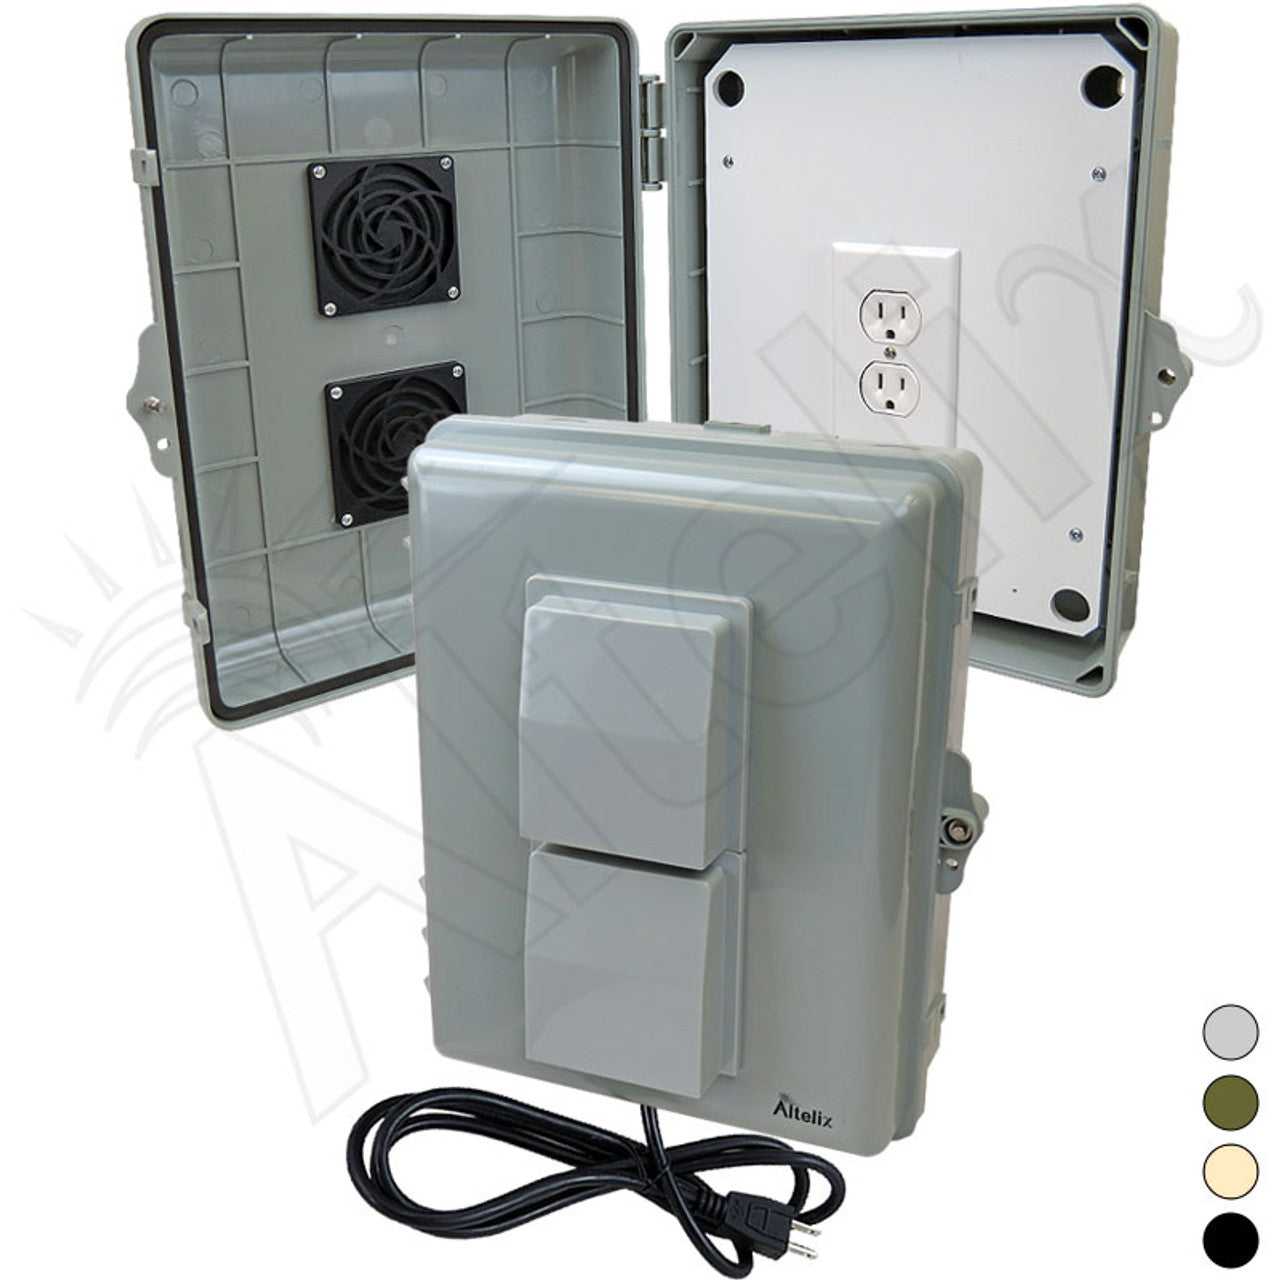 Altelix Weatherproof Vented WiFi Enclosure with No-Drill Equipment Mounting Plate, 120VAC Outlets and Power Cord